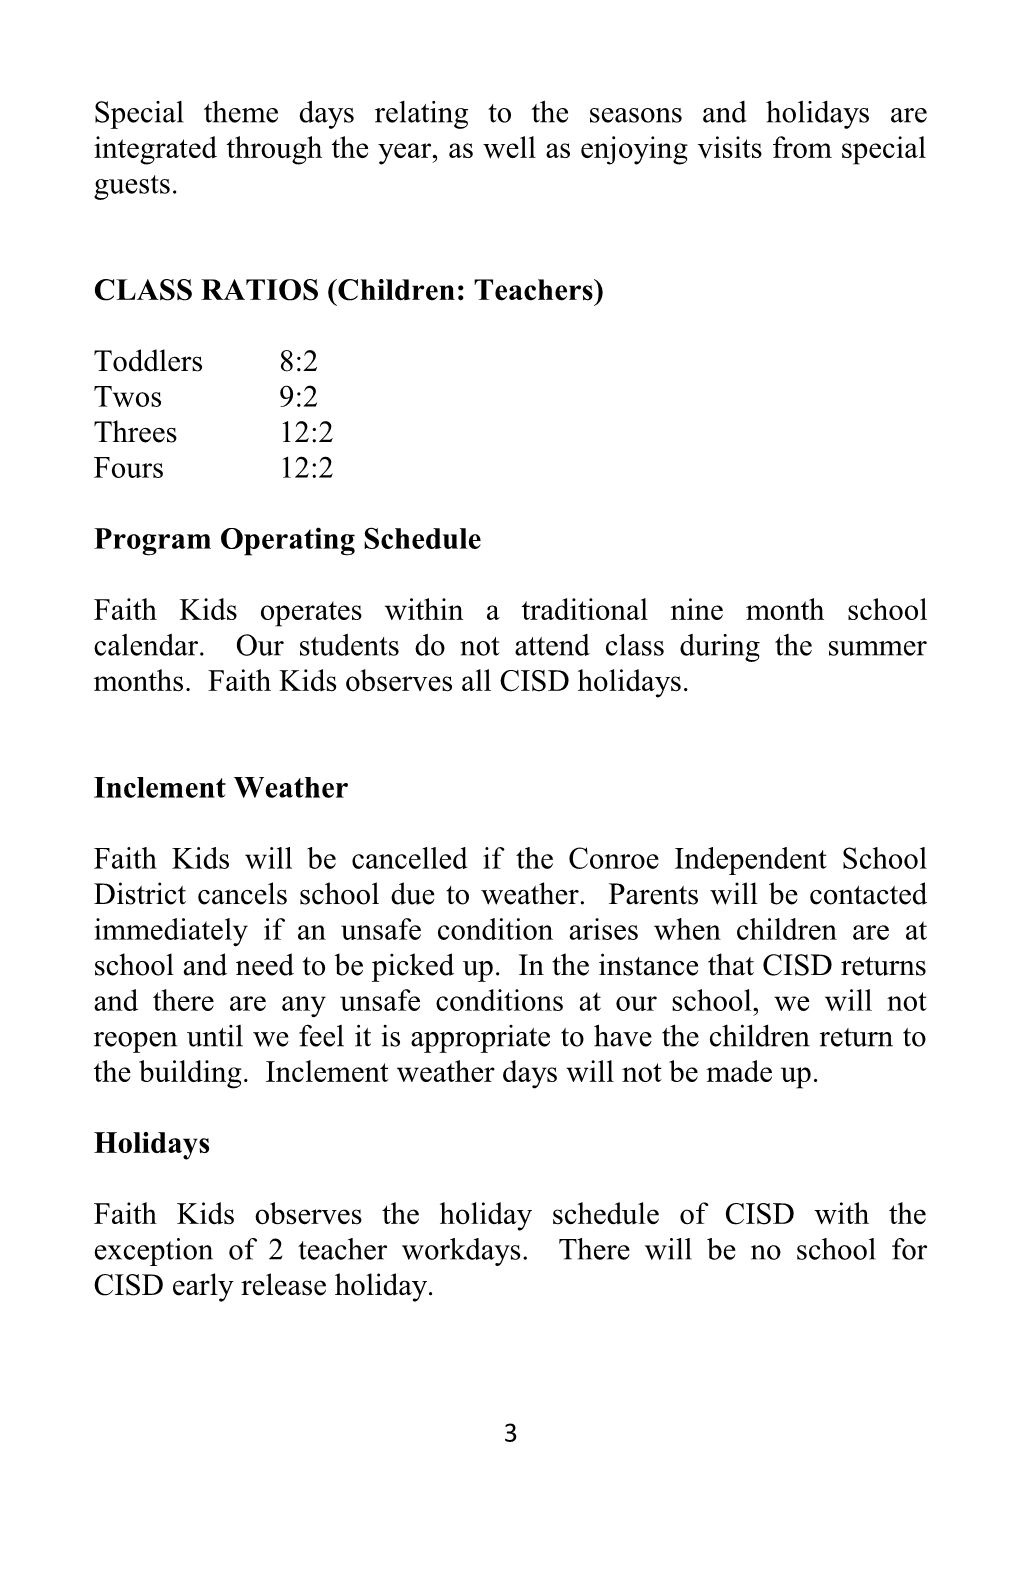 Welcome to Faith Kids Preschool. We Strive to Provide a Loving, Christian Atmosphere Where